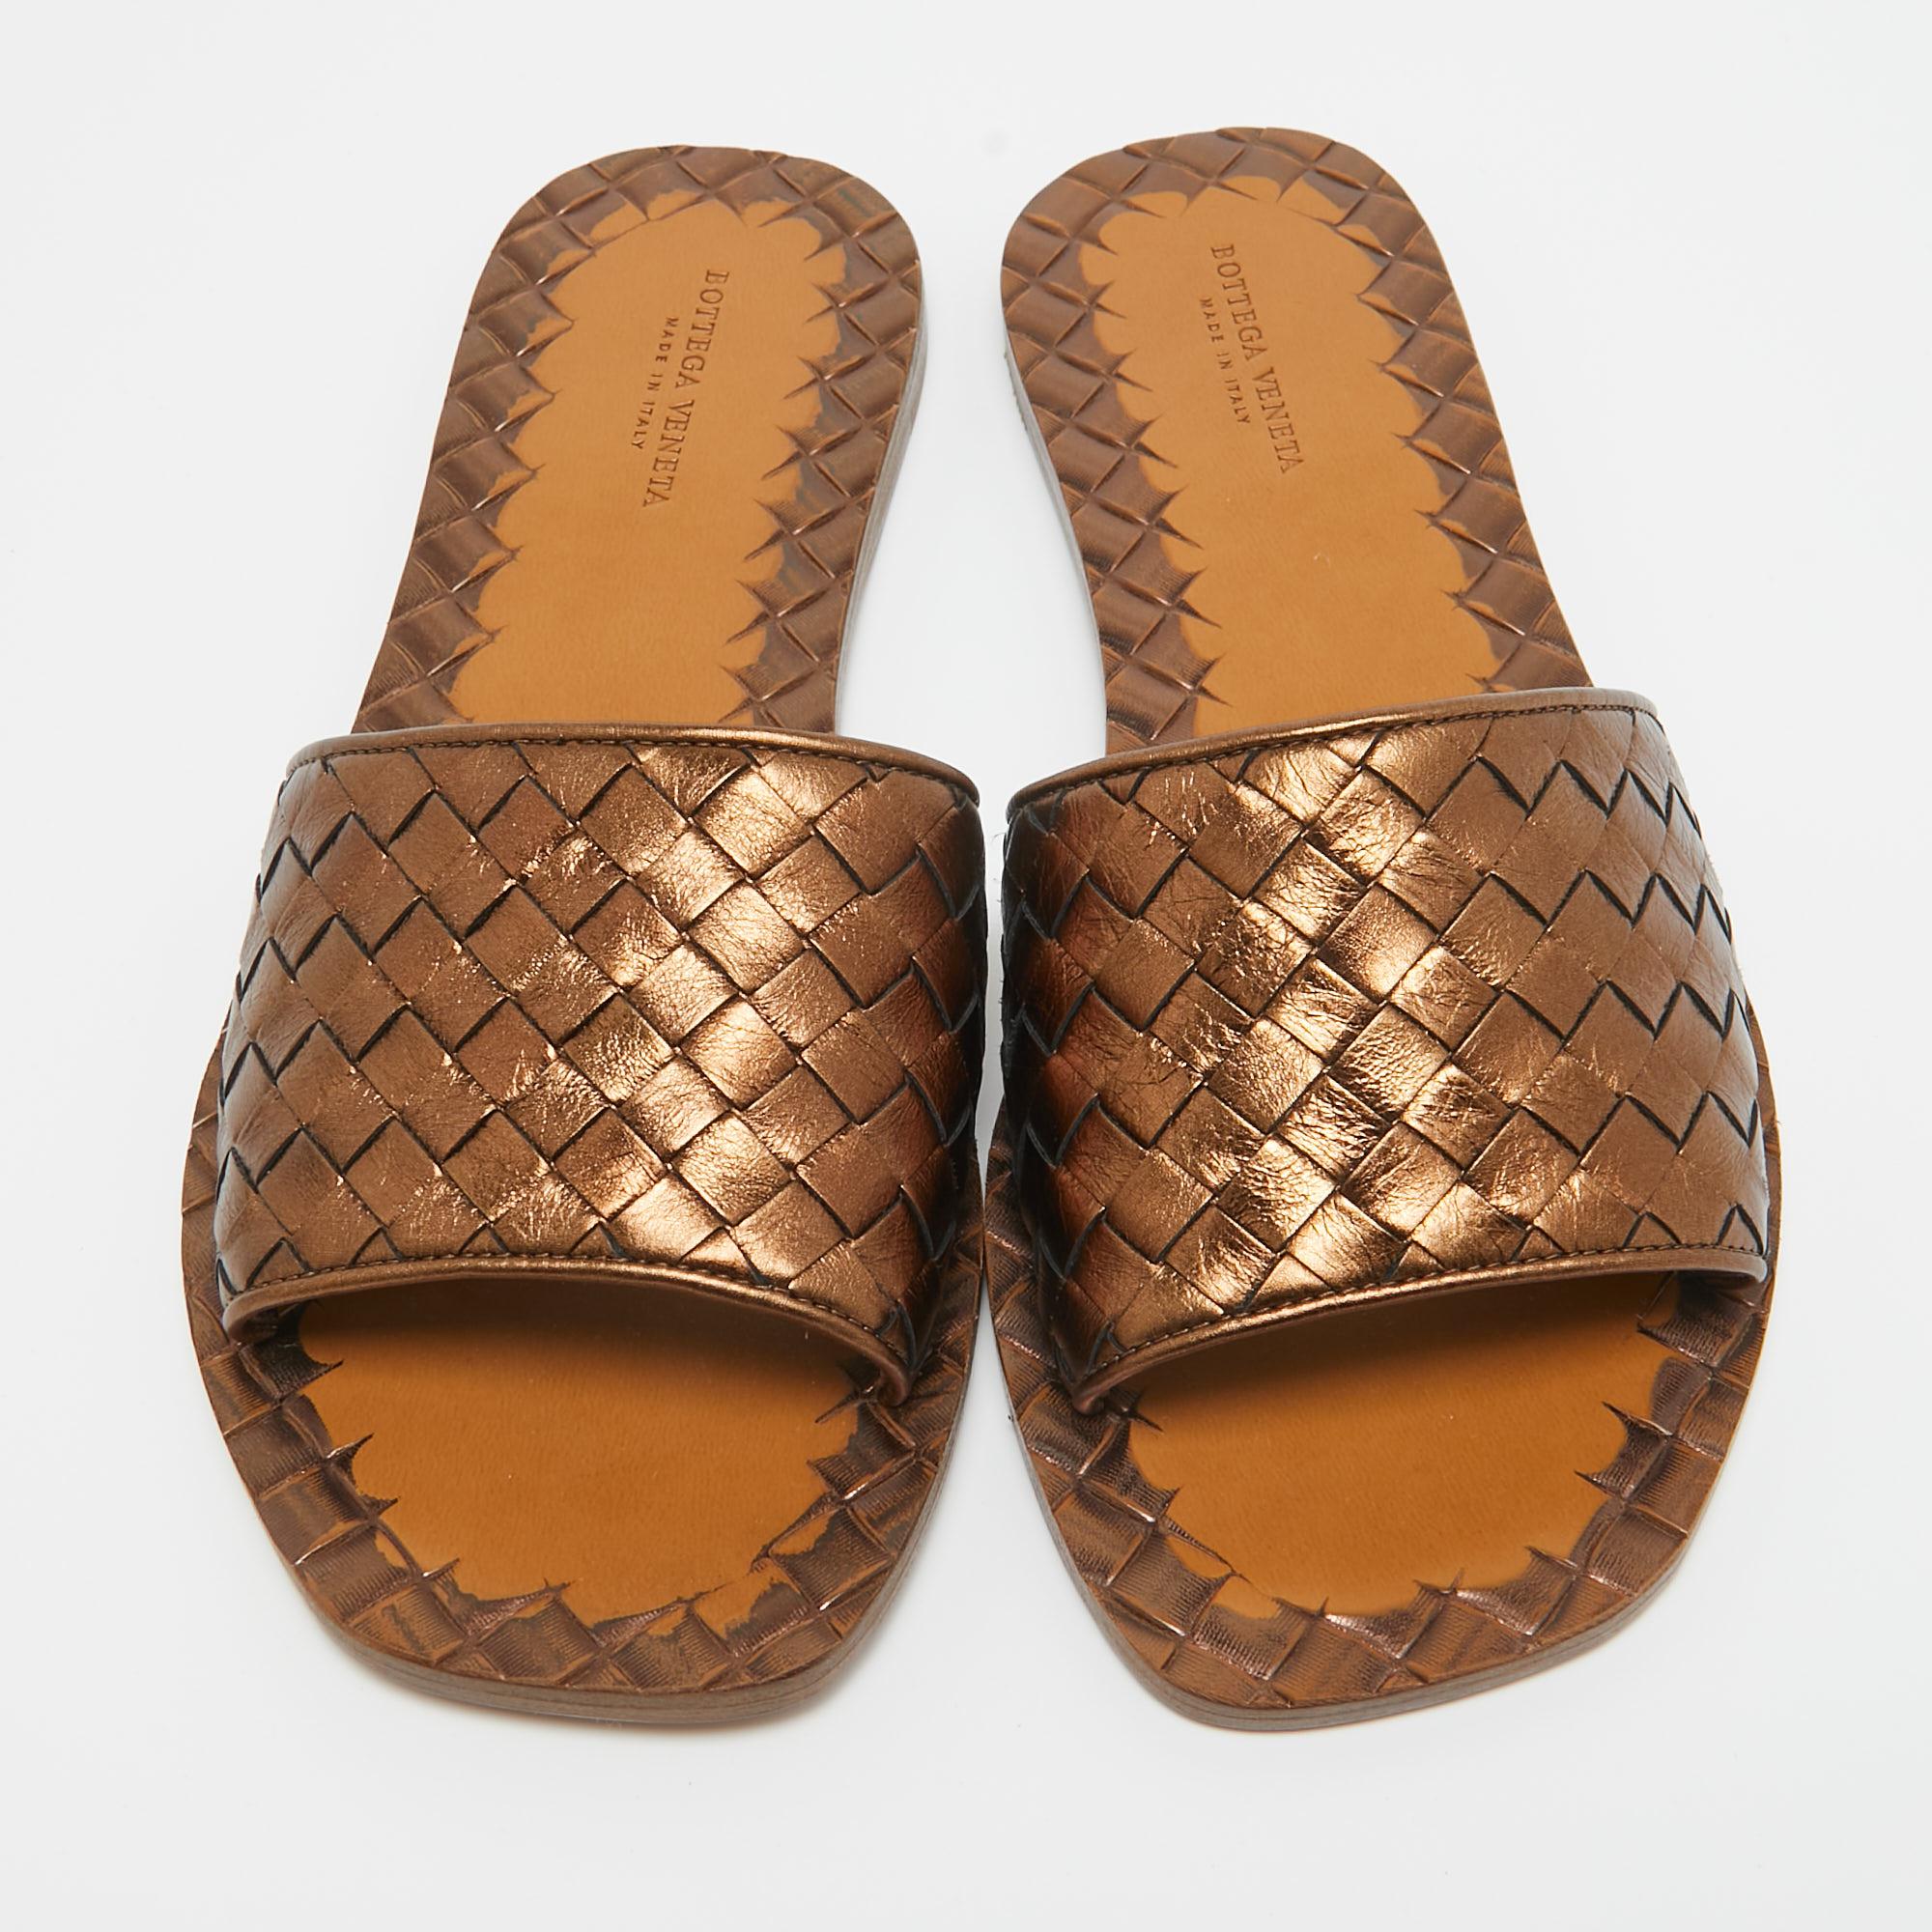 For days of ease and style, Bottega Veneta created these flat slides. They have Intrecciato woven leather uppers for timeless appeal.

Includes: Original Dustbag

